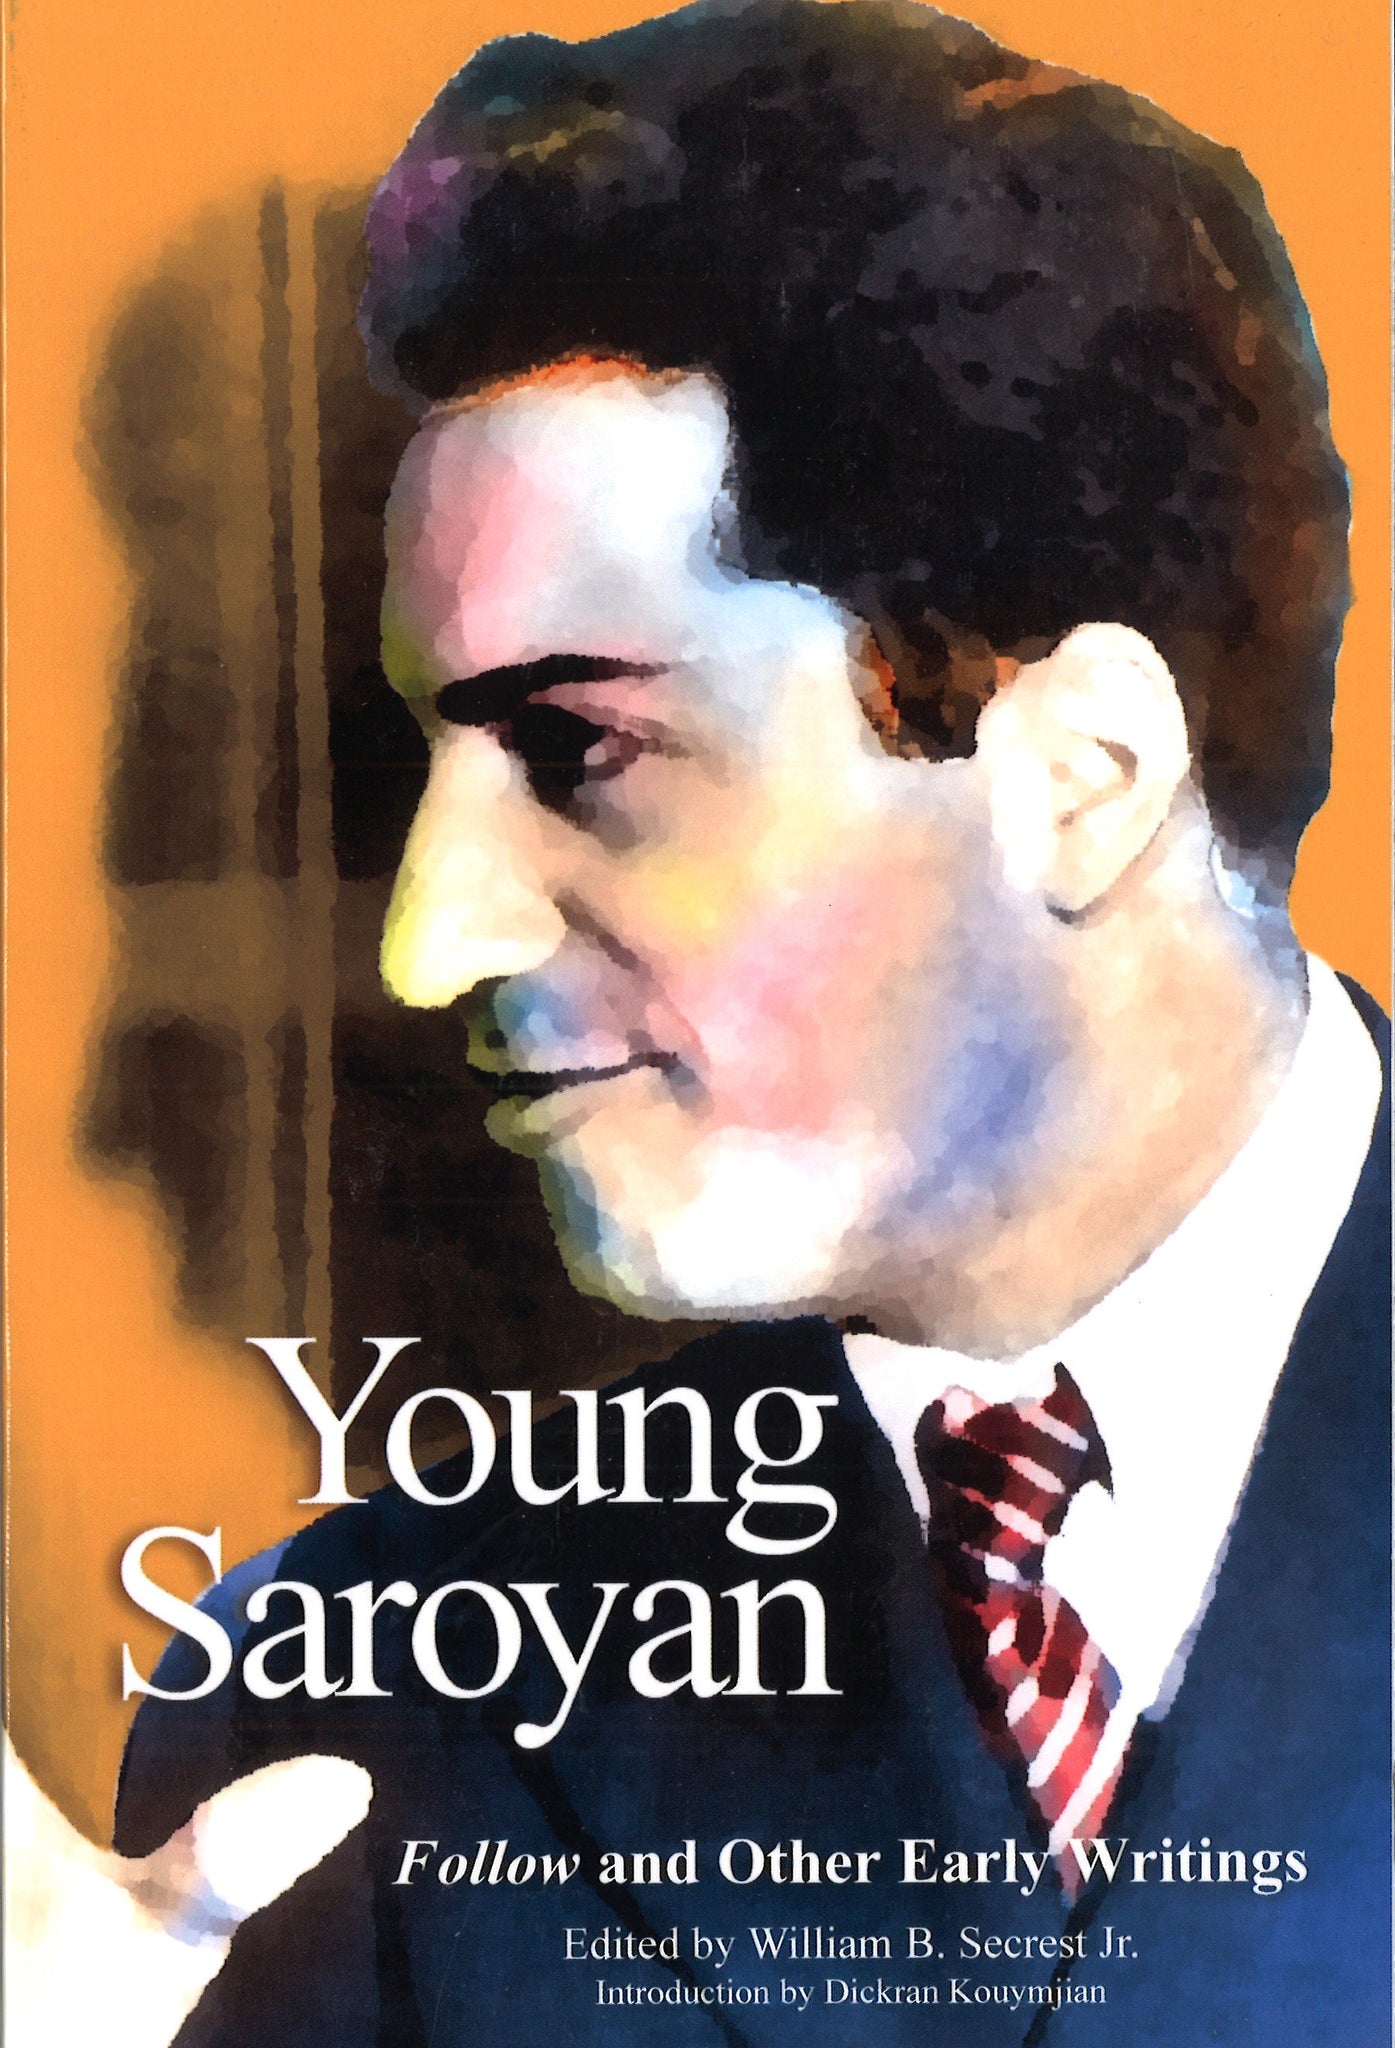 YOUNG SAROYAN: FOLLOW AND OTHER EARLY WRITINGS